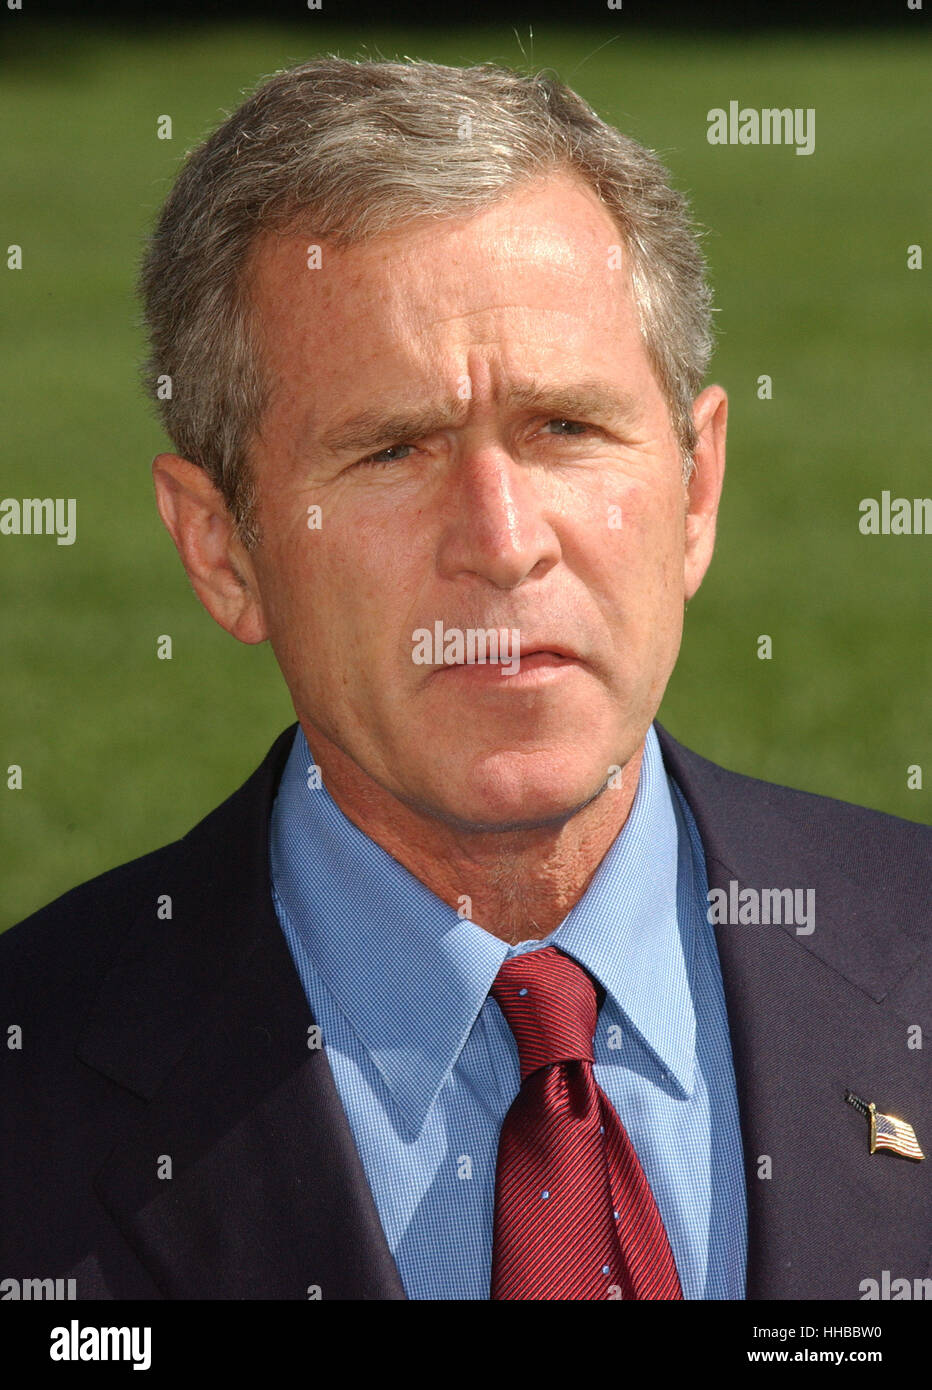 Washington, DC - September 16, 2001 -- United States President George W. Bush returns from a week-end at Camp David on Sunday, September 16, 2001. In remarks to the press as walked to the White House, President Bush warned 'We need to be alert to the fact Stock Photo